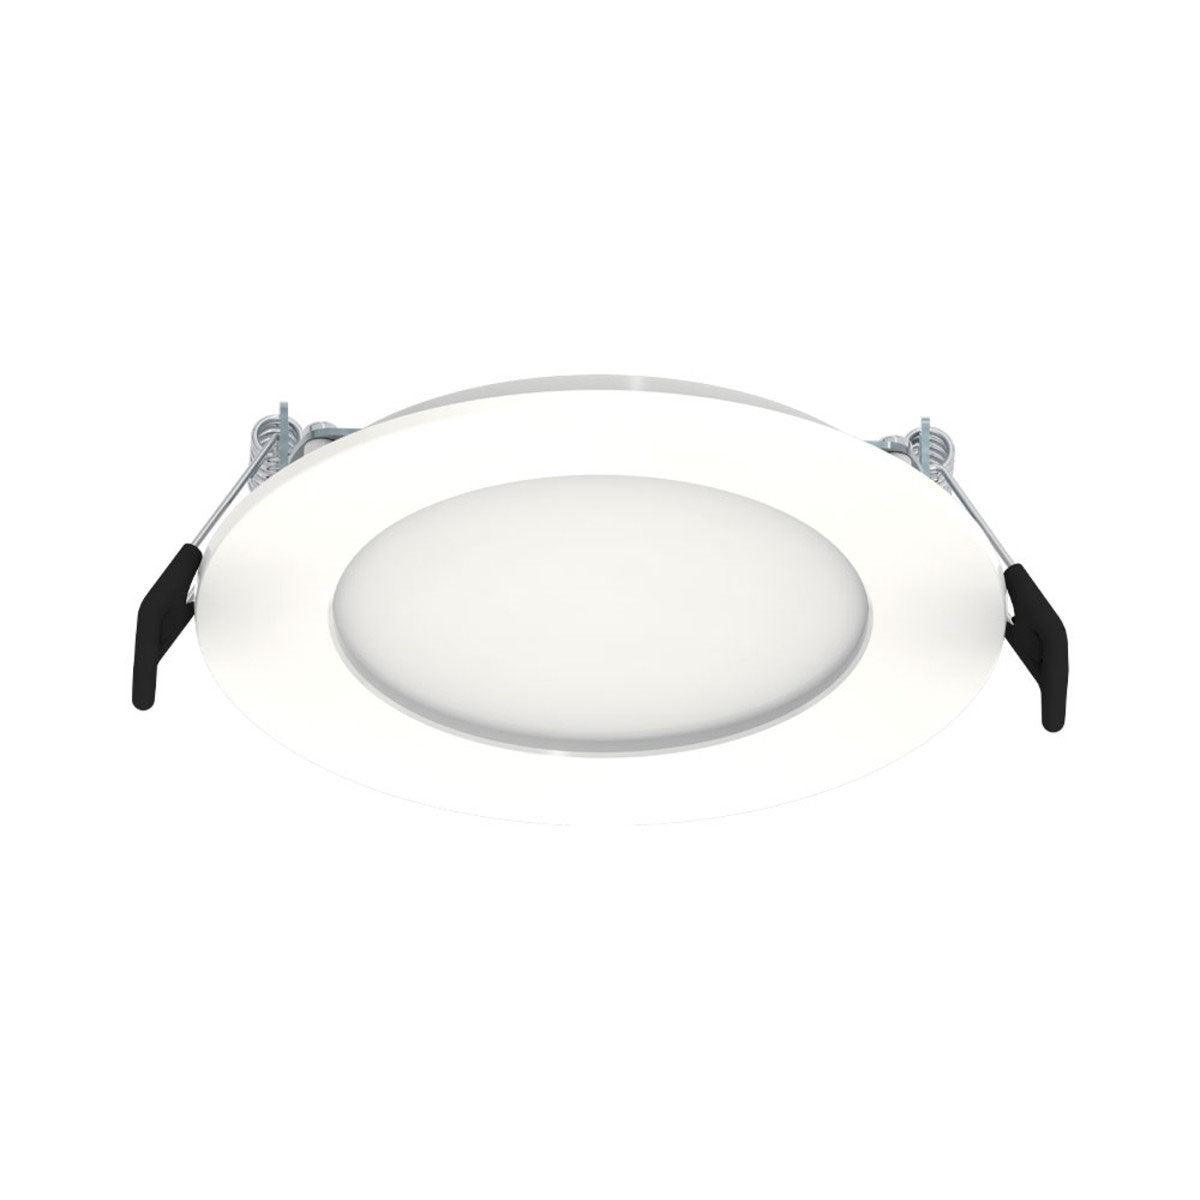 4 In. Edge-Lit Wafer Canless LED Recessed Light, 9 Watt, 700 Lumens, Selectable CCT, 2700K to 5000K, Smooth Trim - Bees Lighting